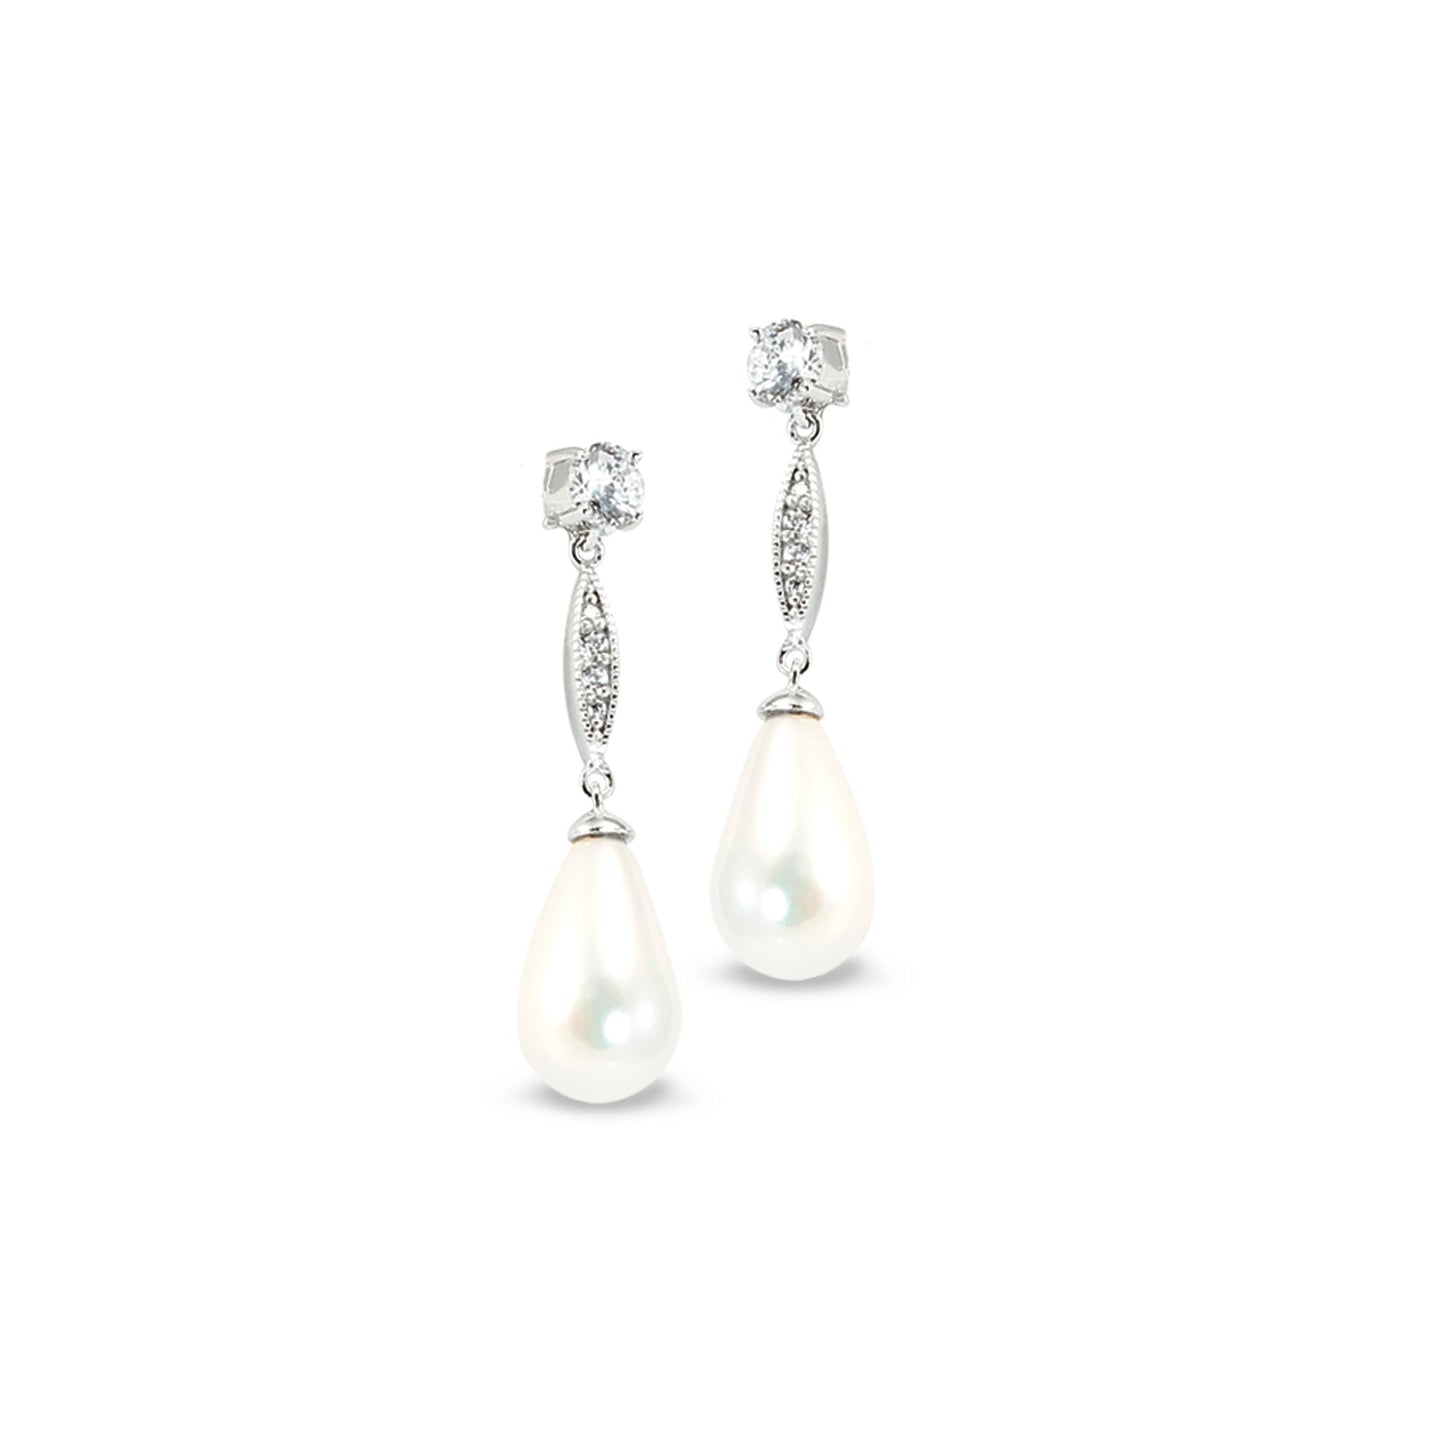 A pearl drop earrings with simulated diamonds displayed on a neutral white background.